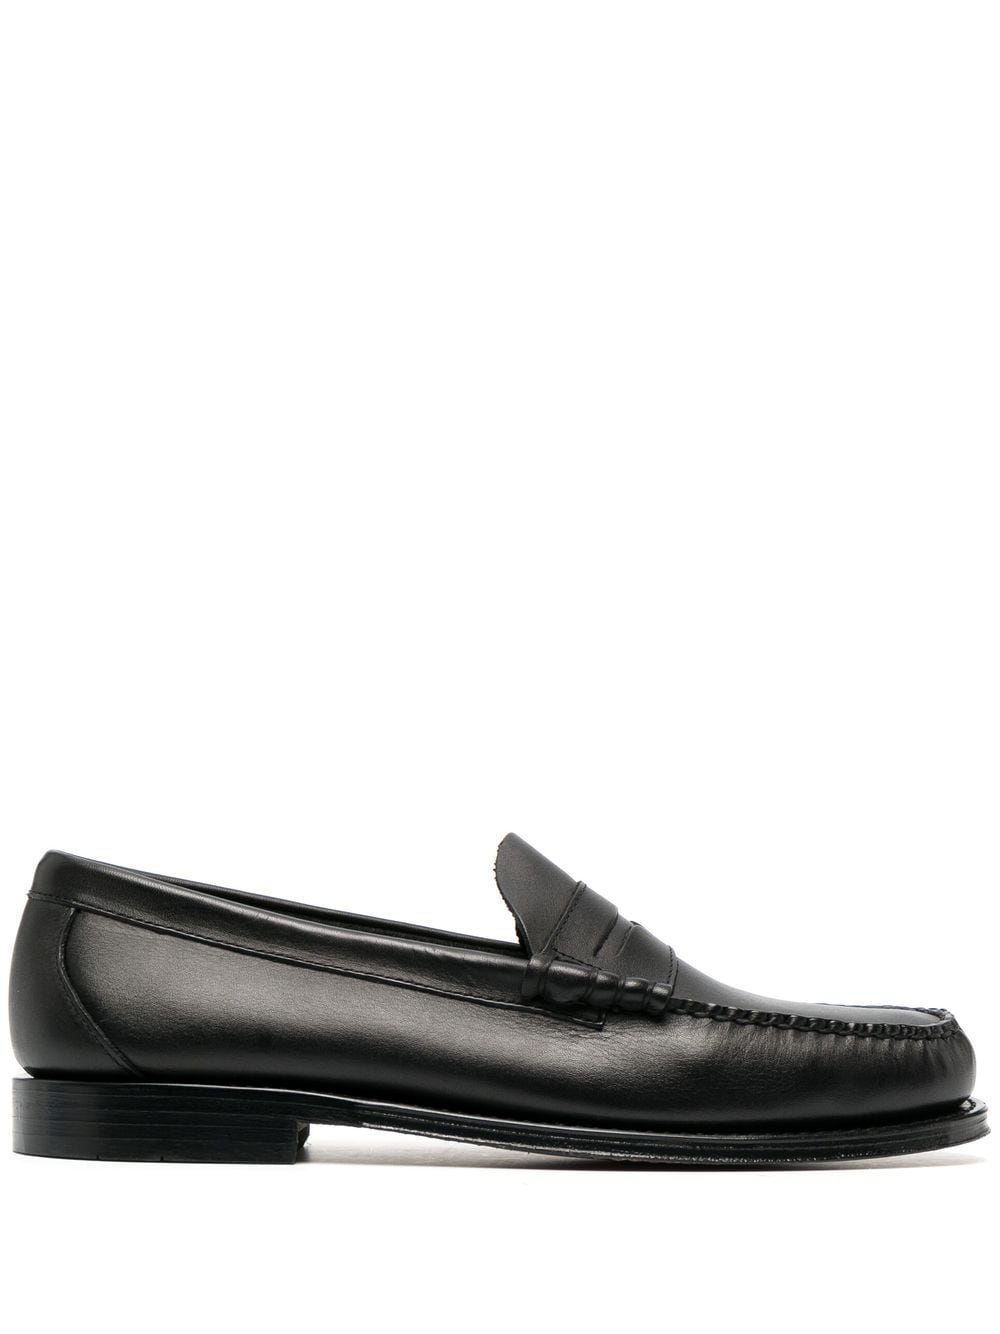 G.H. Bass & Co. Weejuns Larson Penny loafers - Black von G.H. Bass & Co.